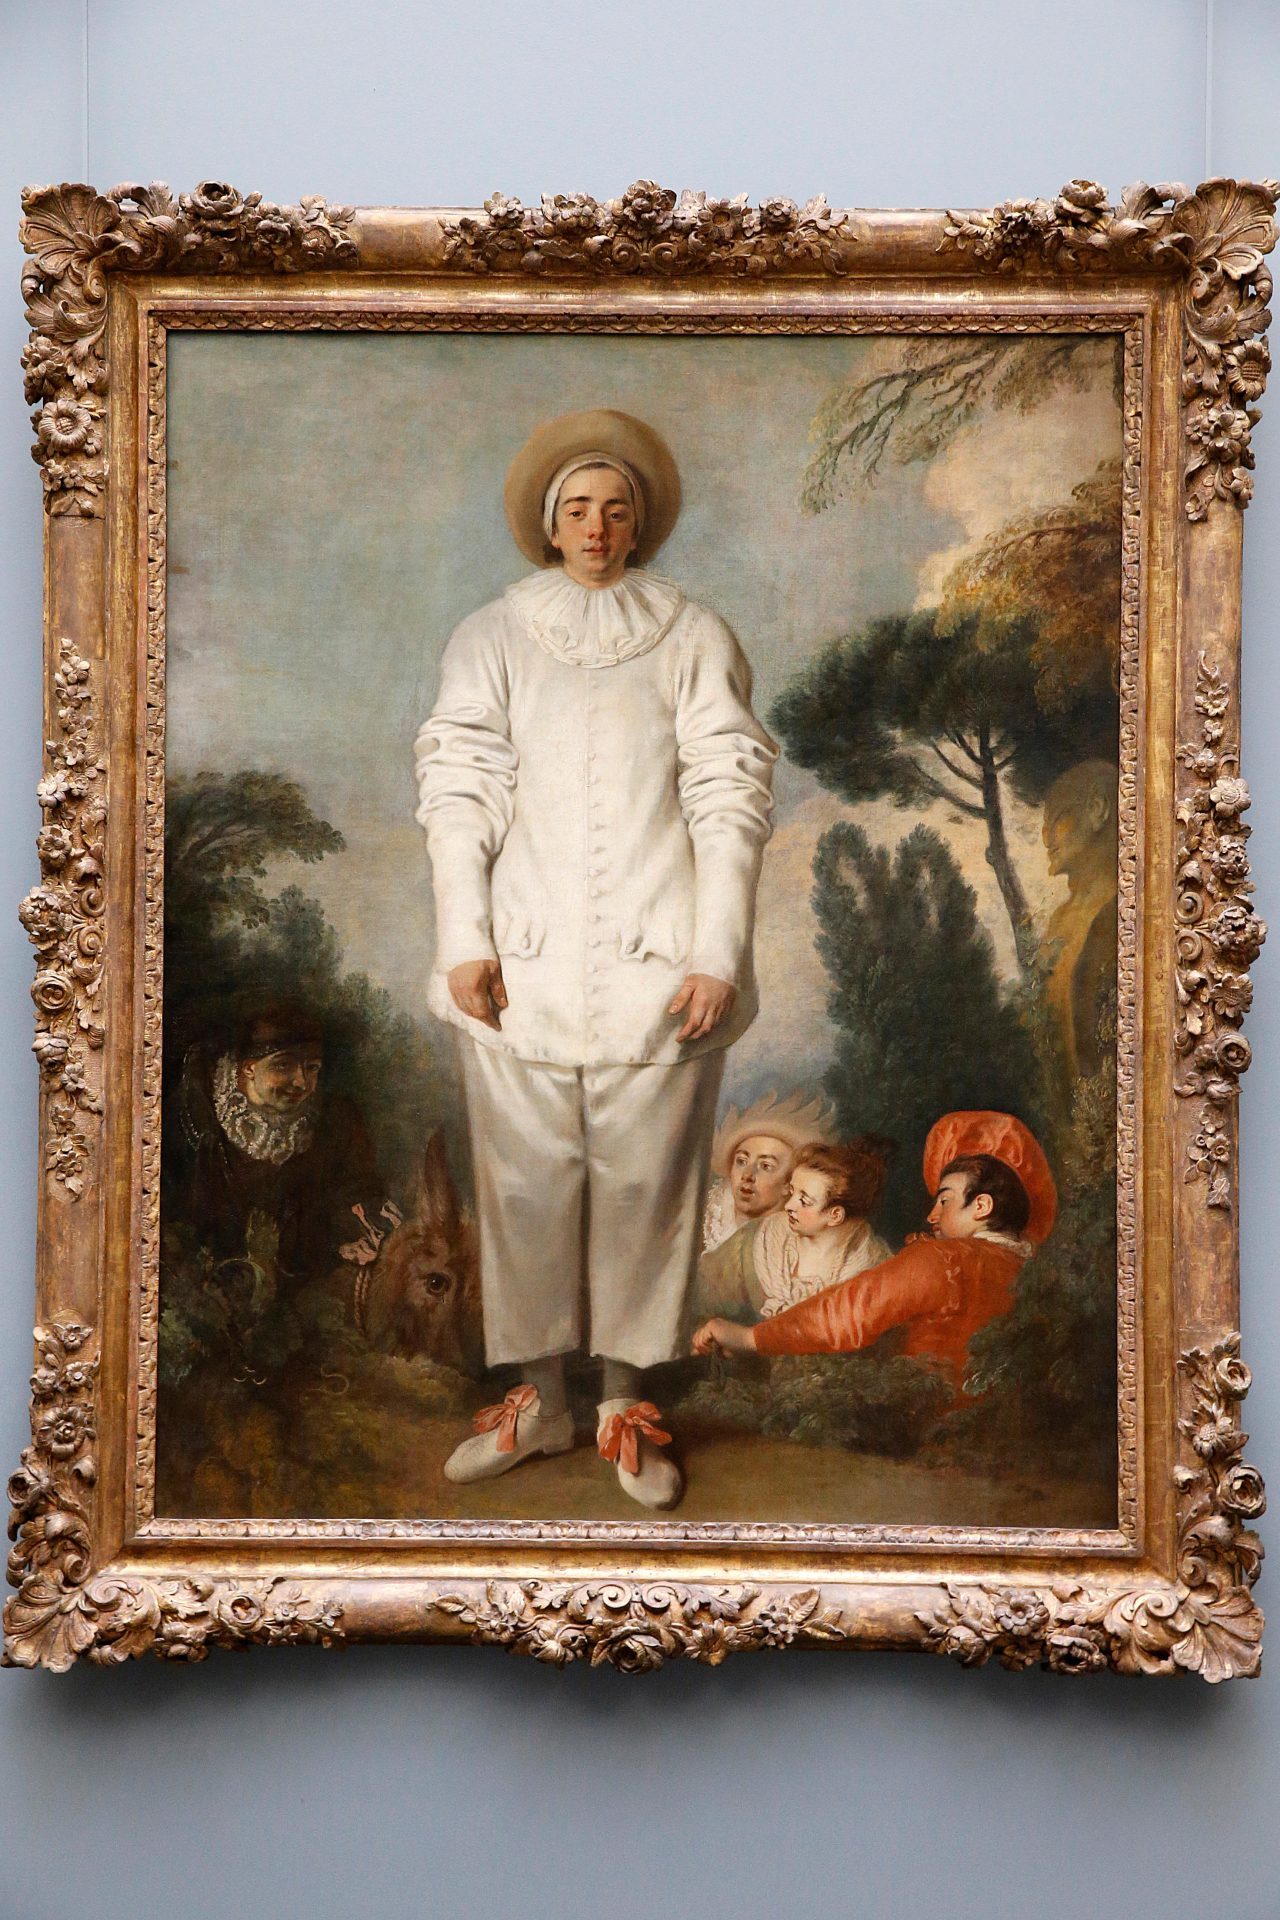 Jean Antoine Watteau Pierrot Formerly Known As Gilles Musee Du Louvre Paris © Godong Alamy Stock Photo 1280x1920 